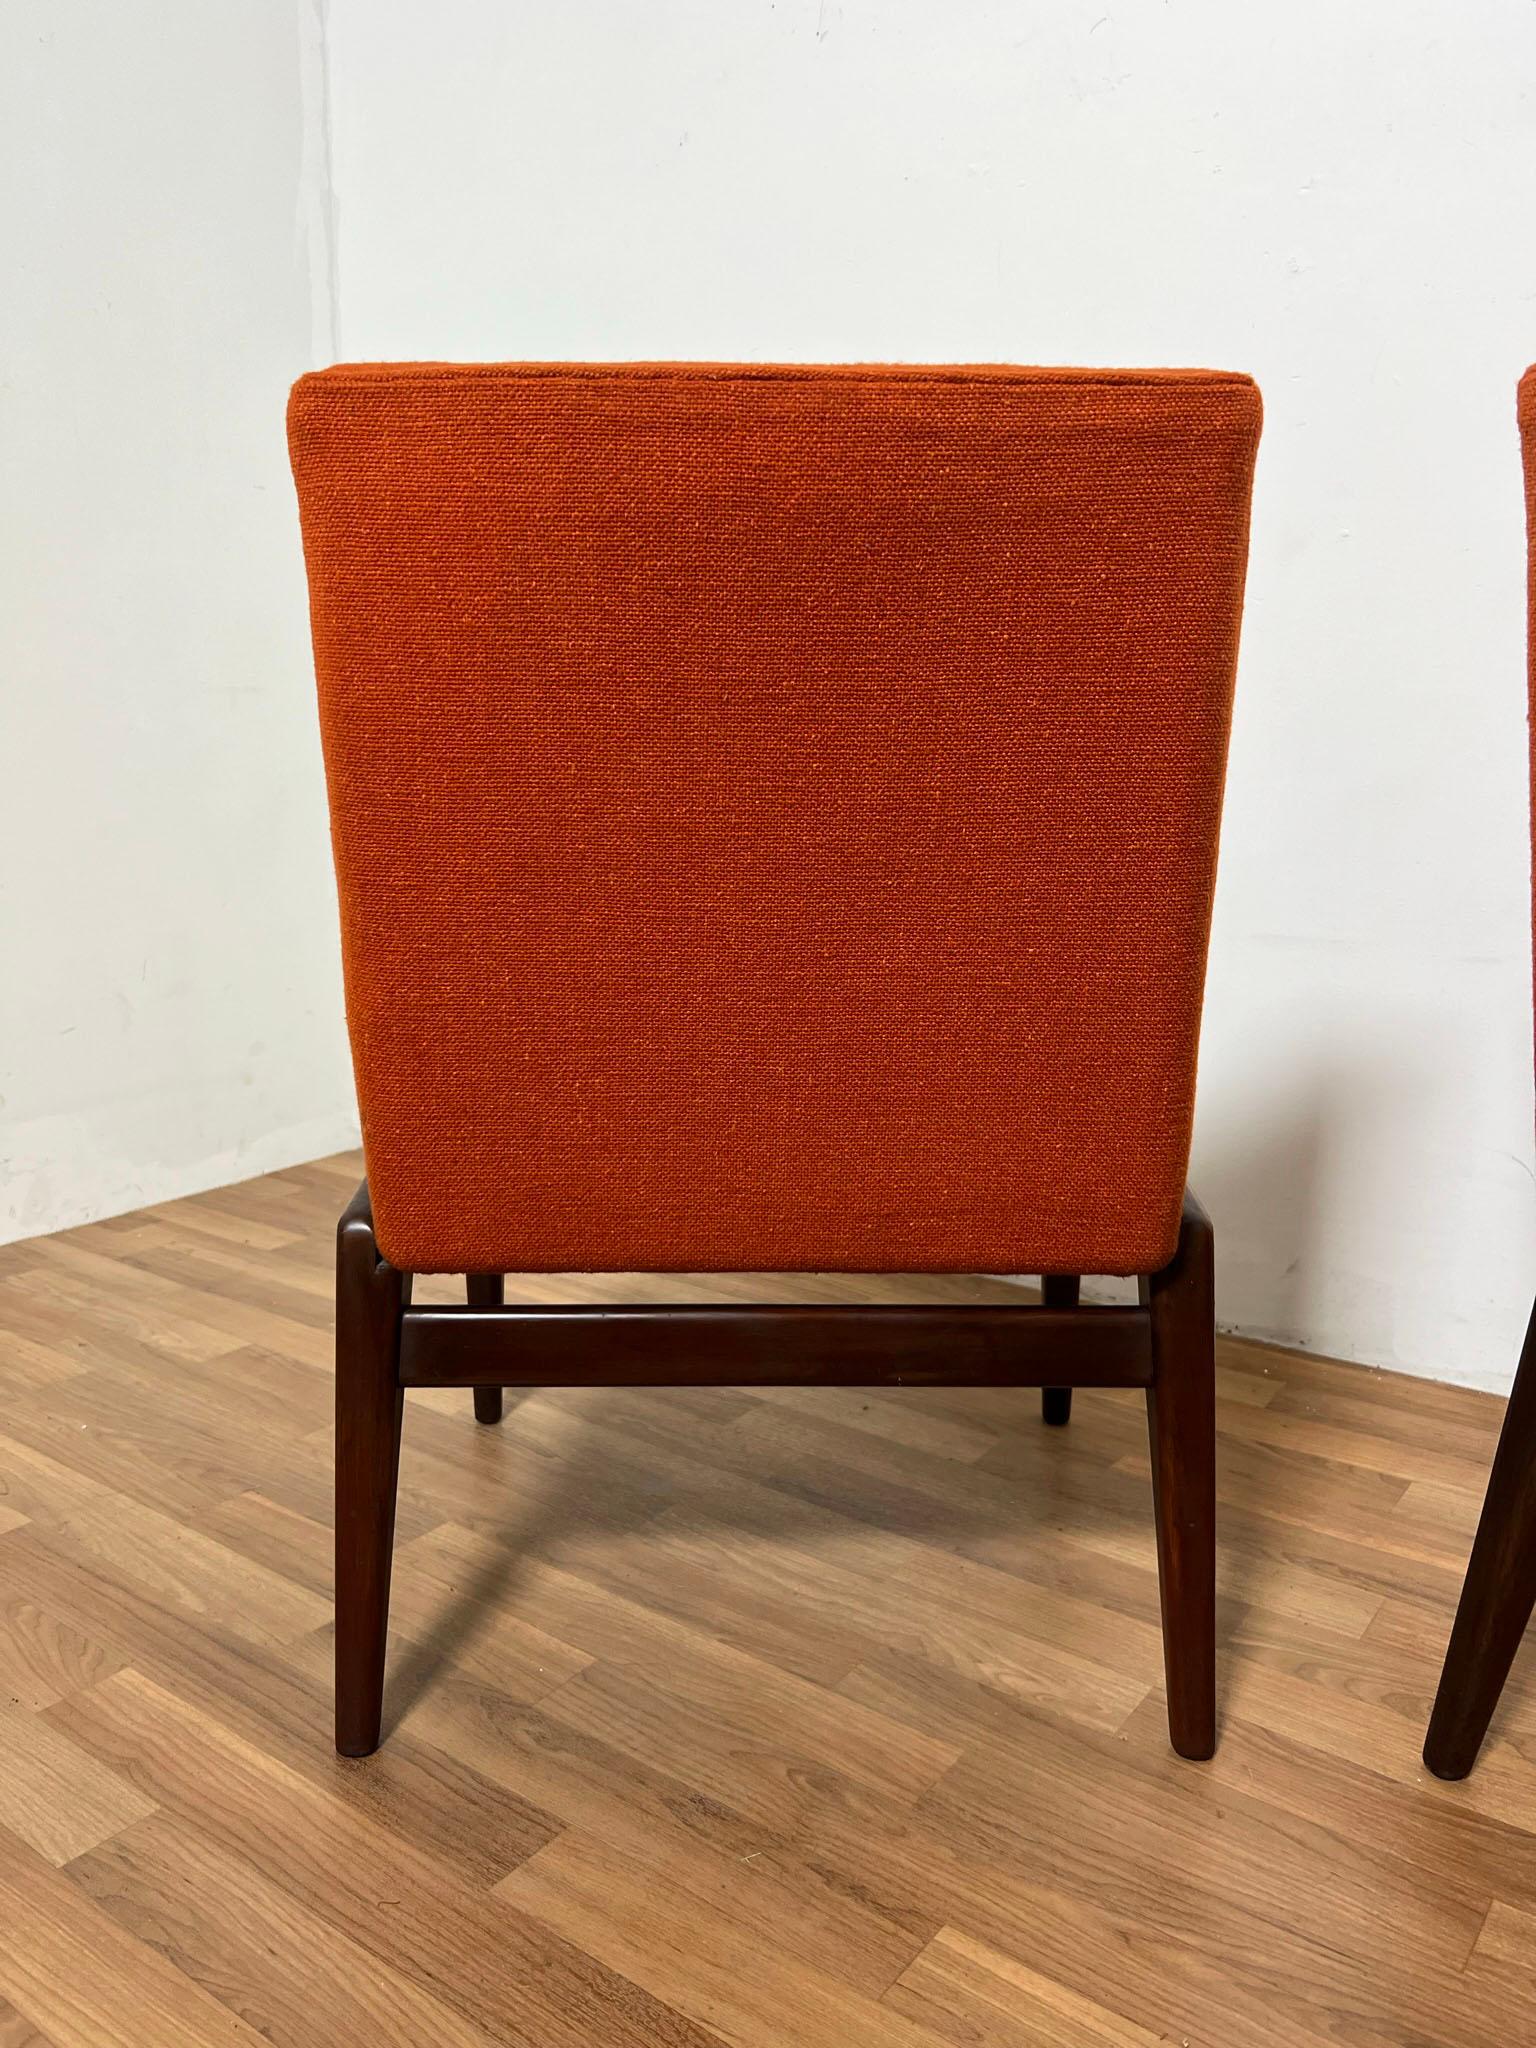 Pair of Jens Risom C-220 Lounge Chairs Circa 1950s For Sale 3